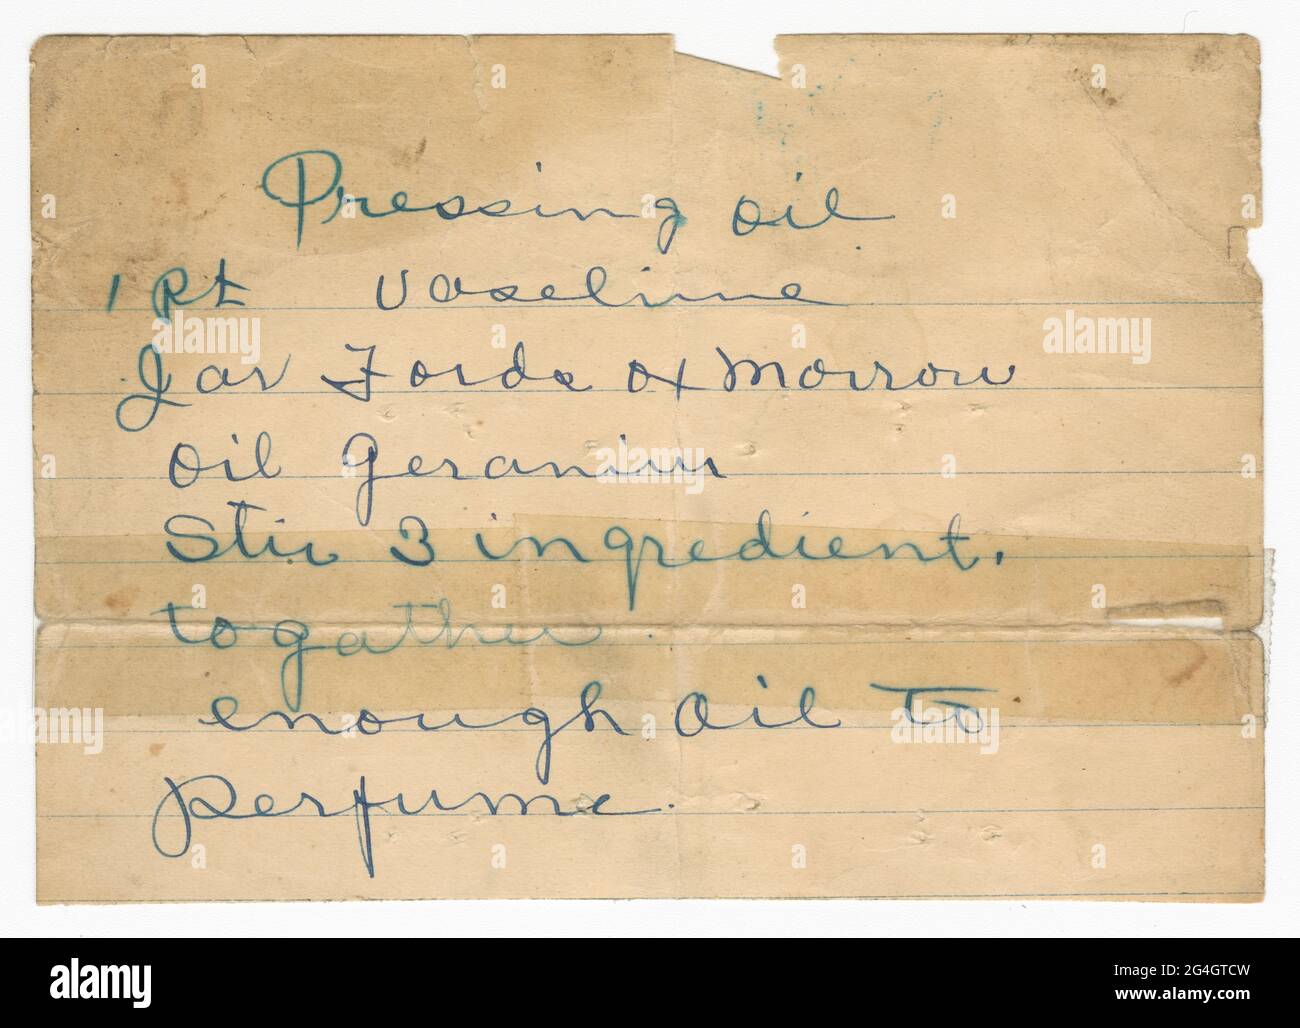 This is a handwritten recipe for Pressing Oil Formula created by Poro College written in blue ink on lined paper. &quot;Pressing oil/ 1 pt vaseline,/Jar Fords ox marrow/ oil geranium/ Stir 3 ingredient,/ together/ enough oil to/ perfume.&quot; The recipe has deep creases from folding that have been reinforced with clear tape. Poro College, a cosmetology school and centre, was established in 1918 by Annie Turnbo Malone, an African-American businesswoman, inventor and philanthropist. Stock Photo